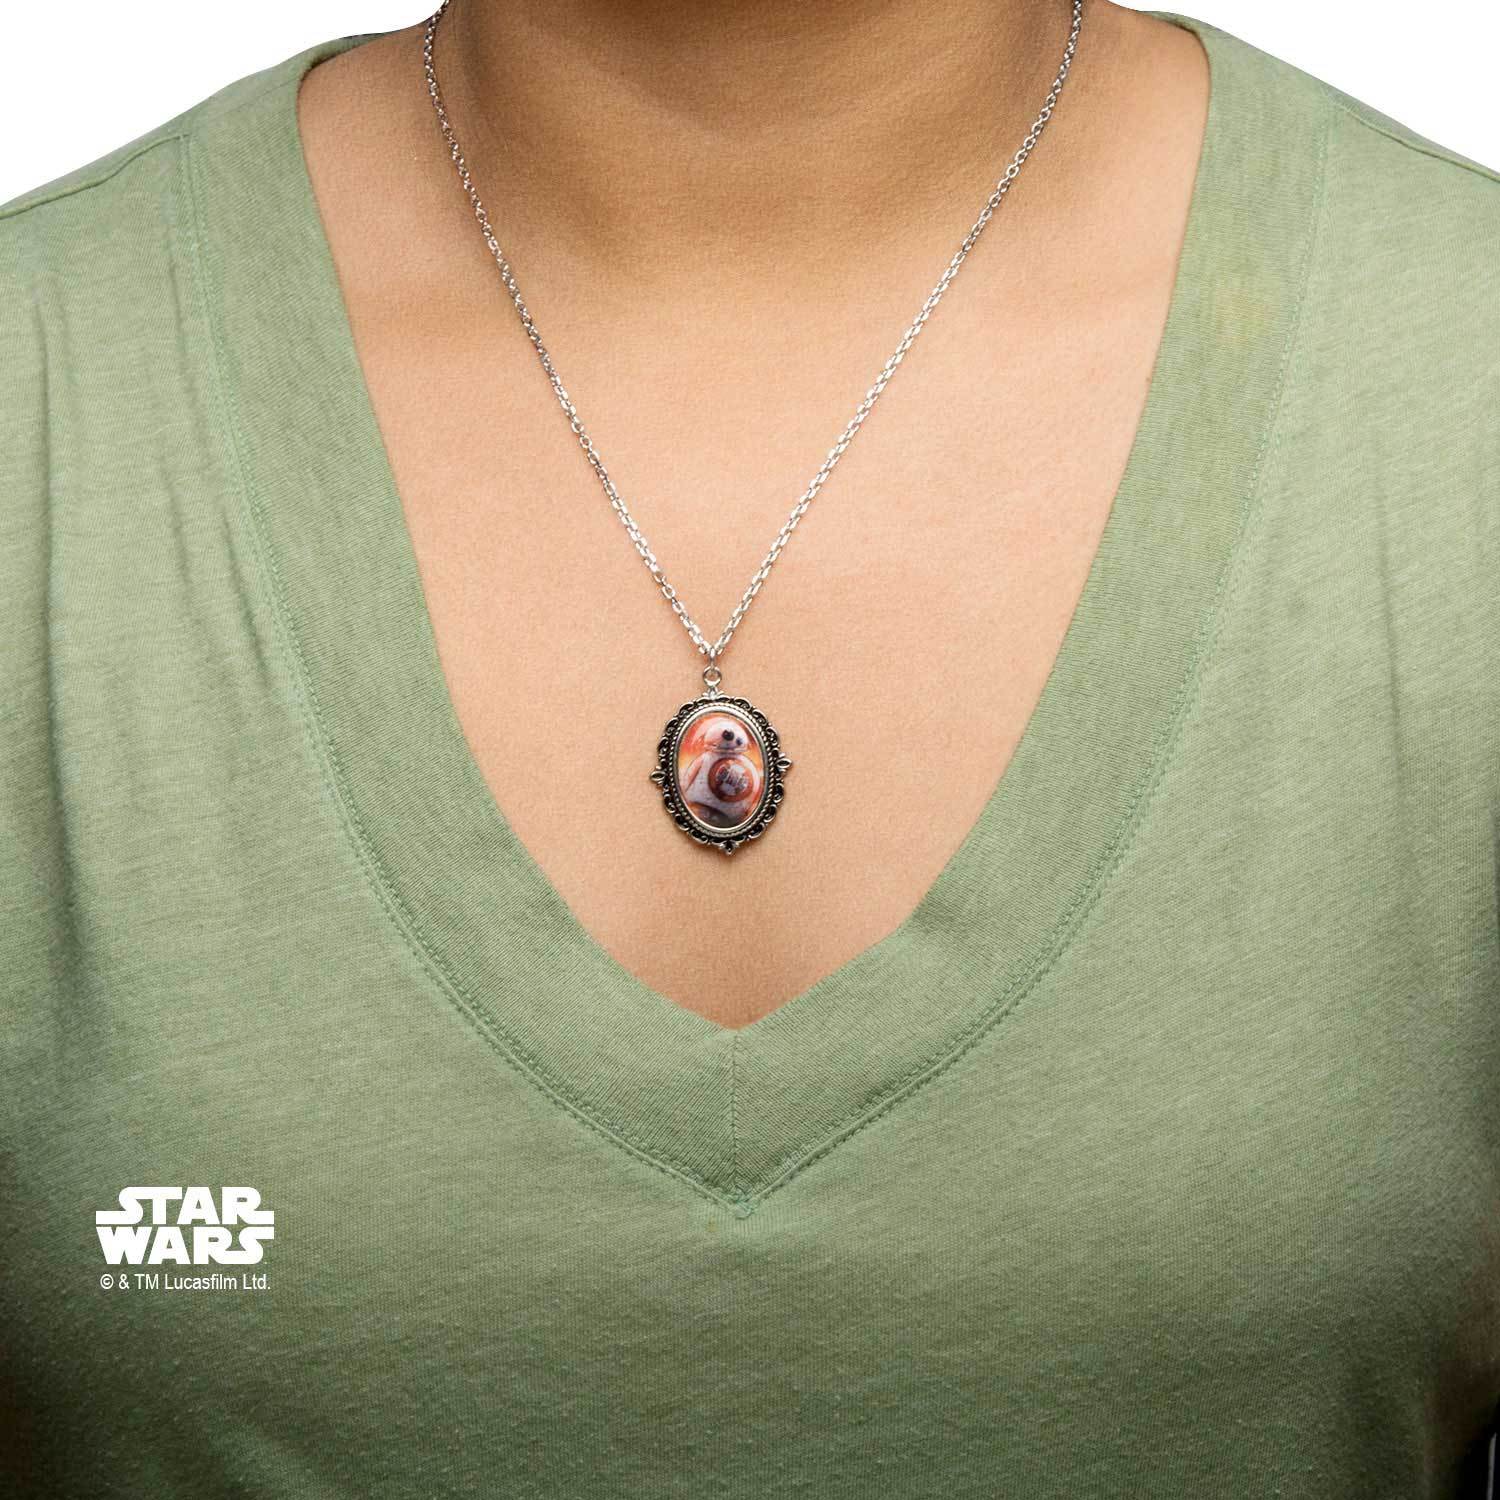 Star Wars Episode 7 BB-8 Cameo Pendant Necklace